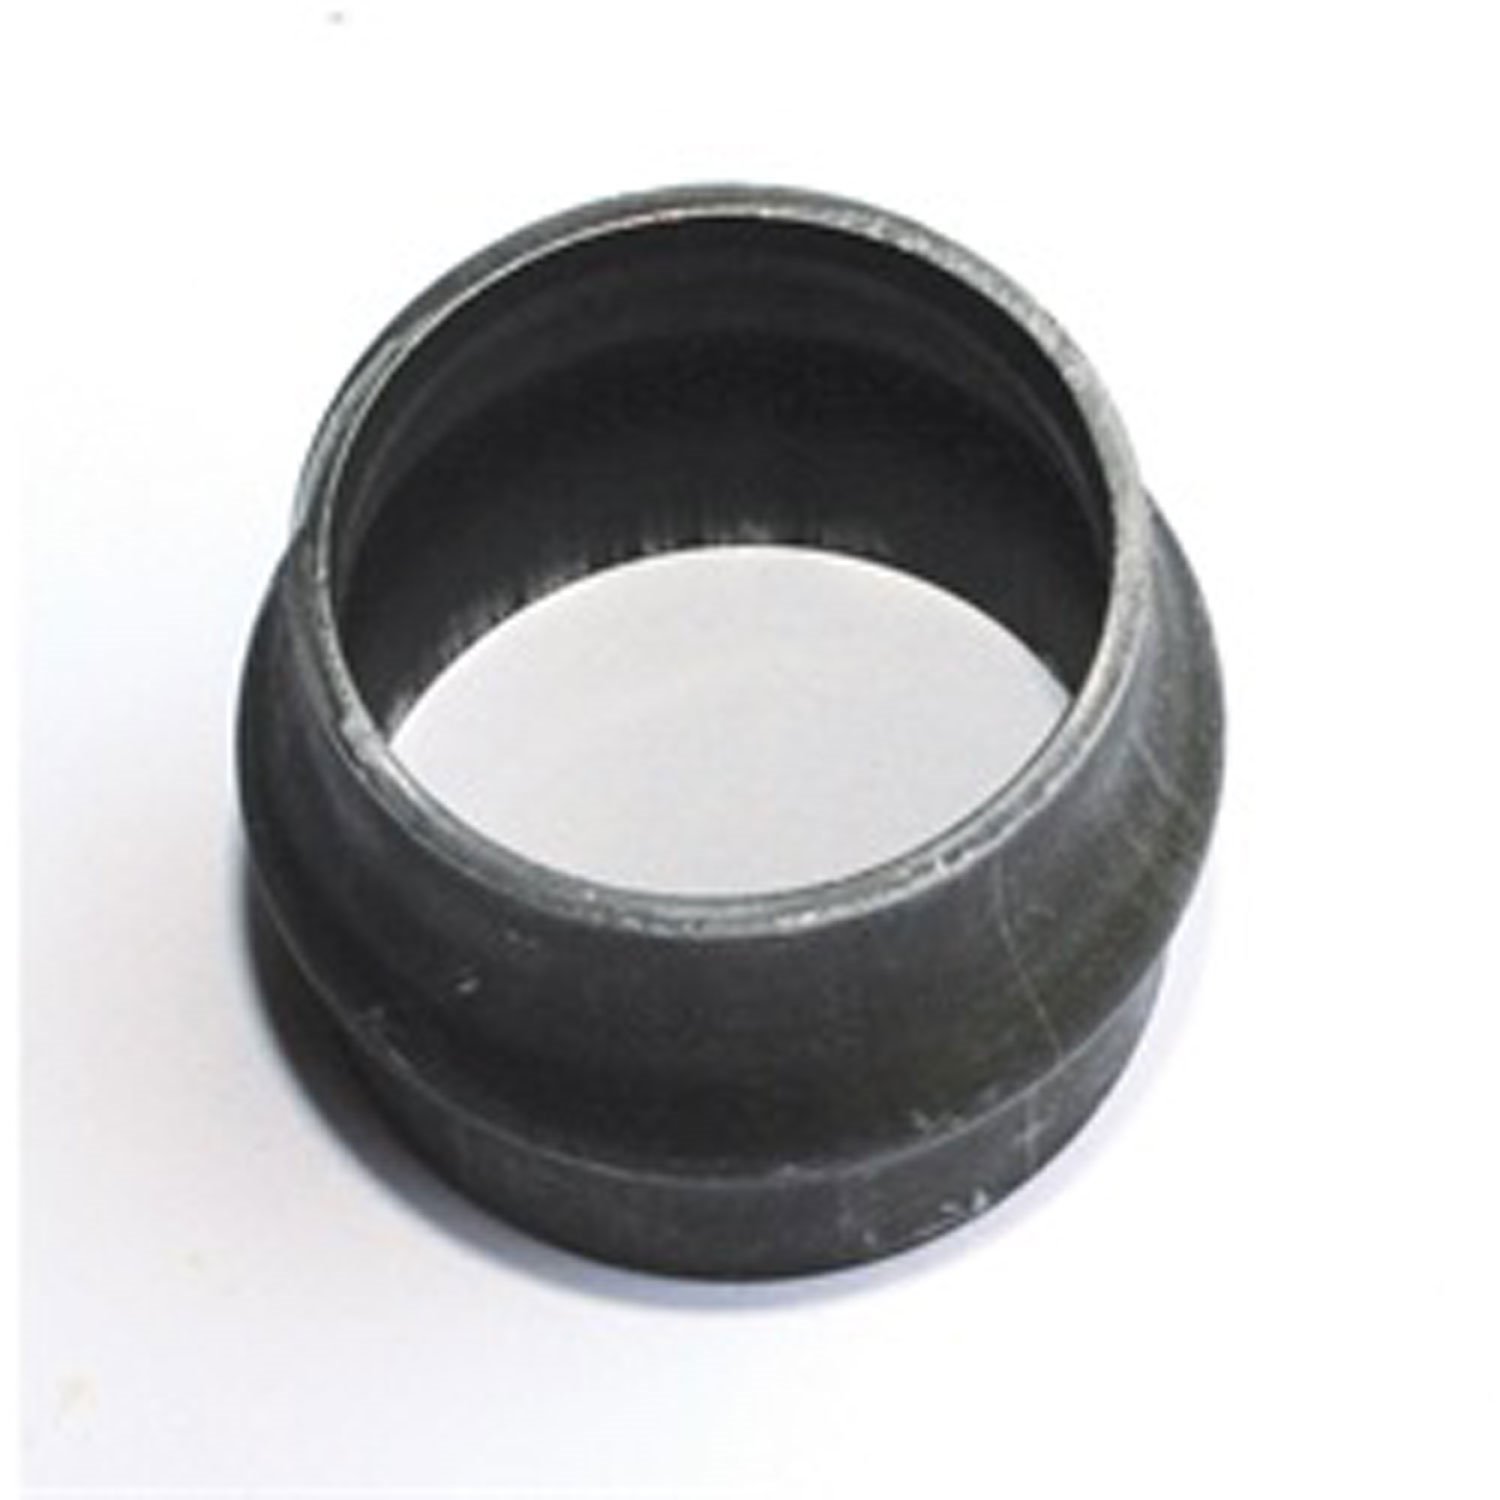 This pinion bearing crush spacer from Omix-ADA fits